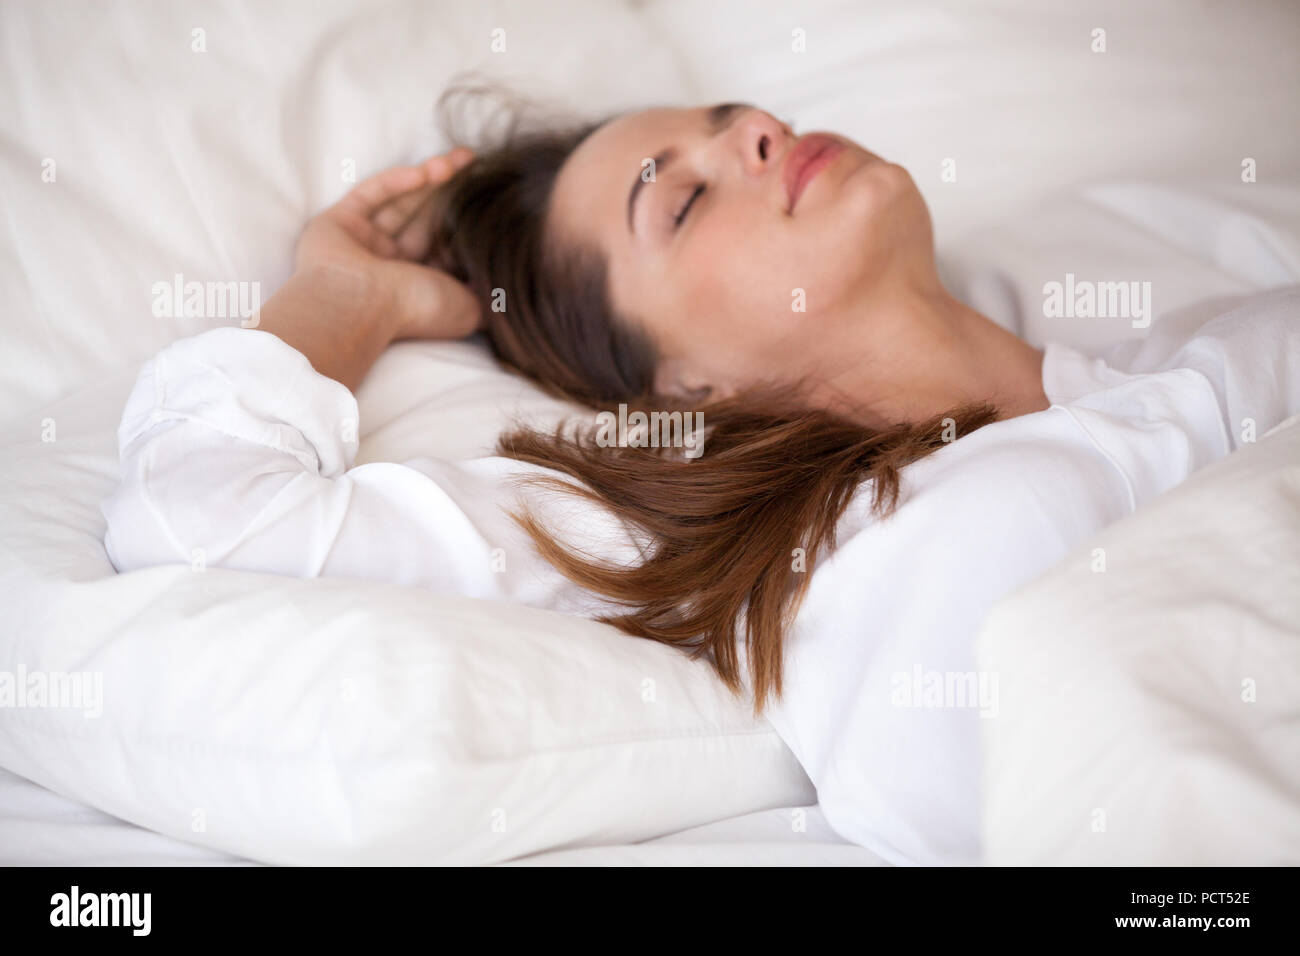 Calm young female sleeping in cozy white bed relaxing Stock Photo